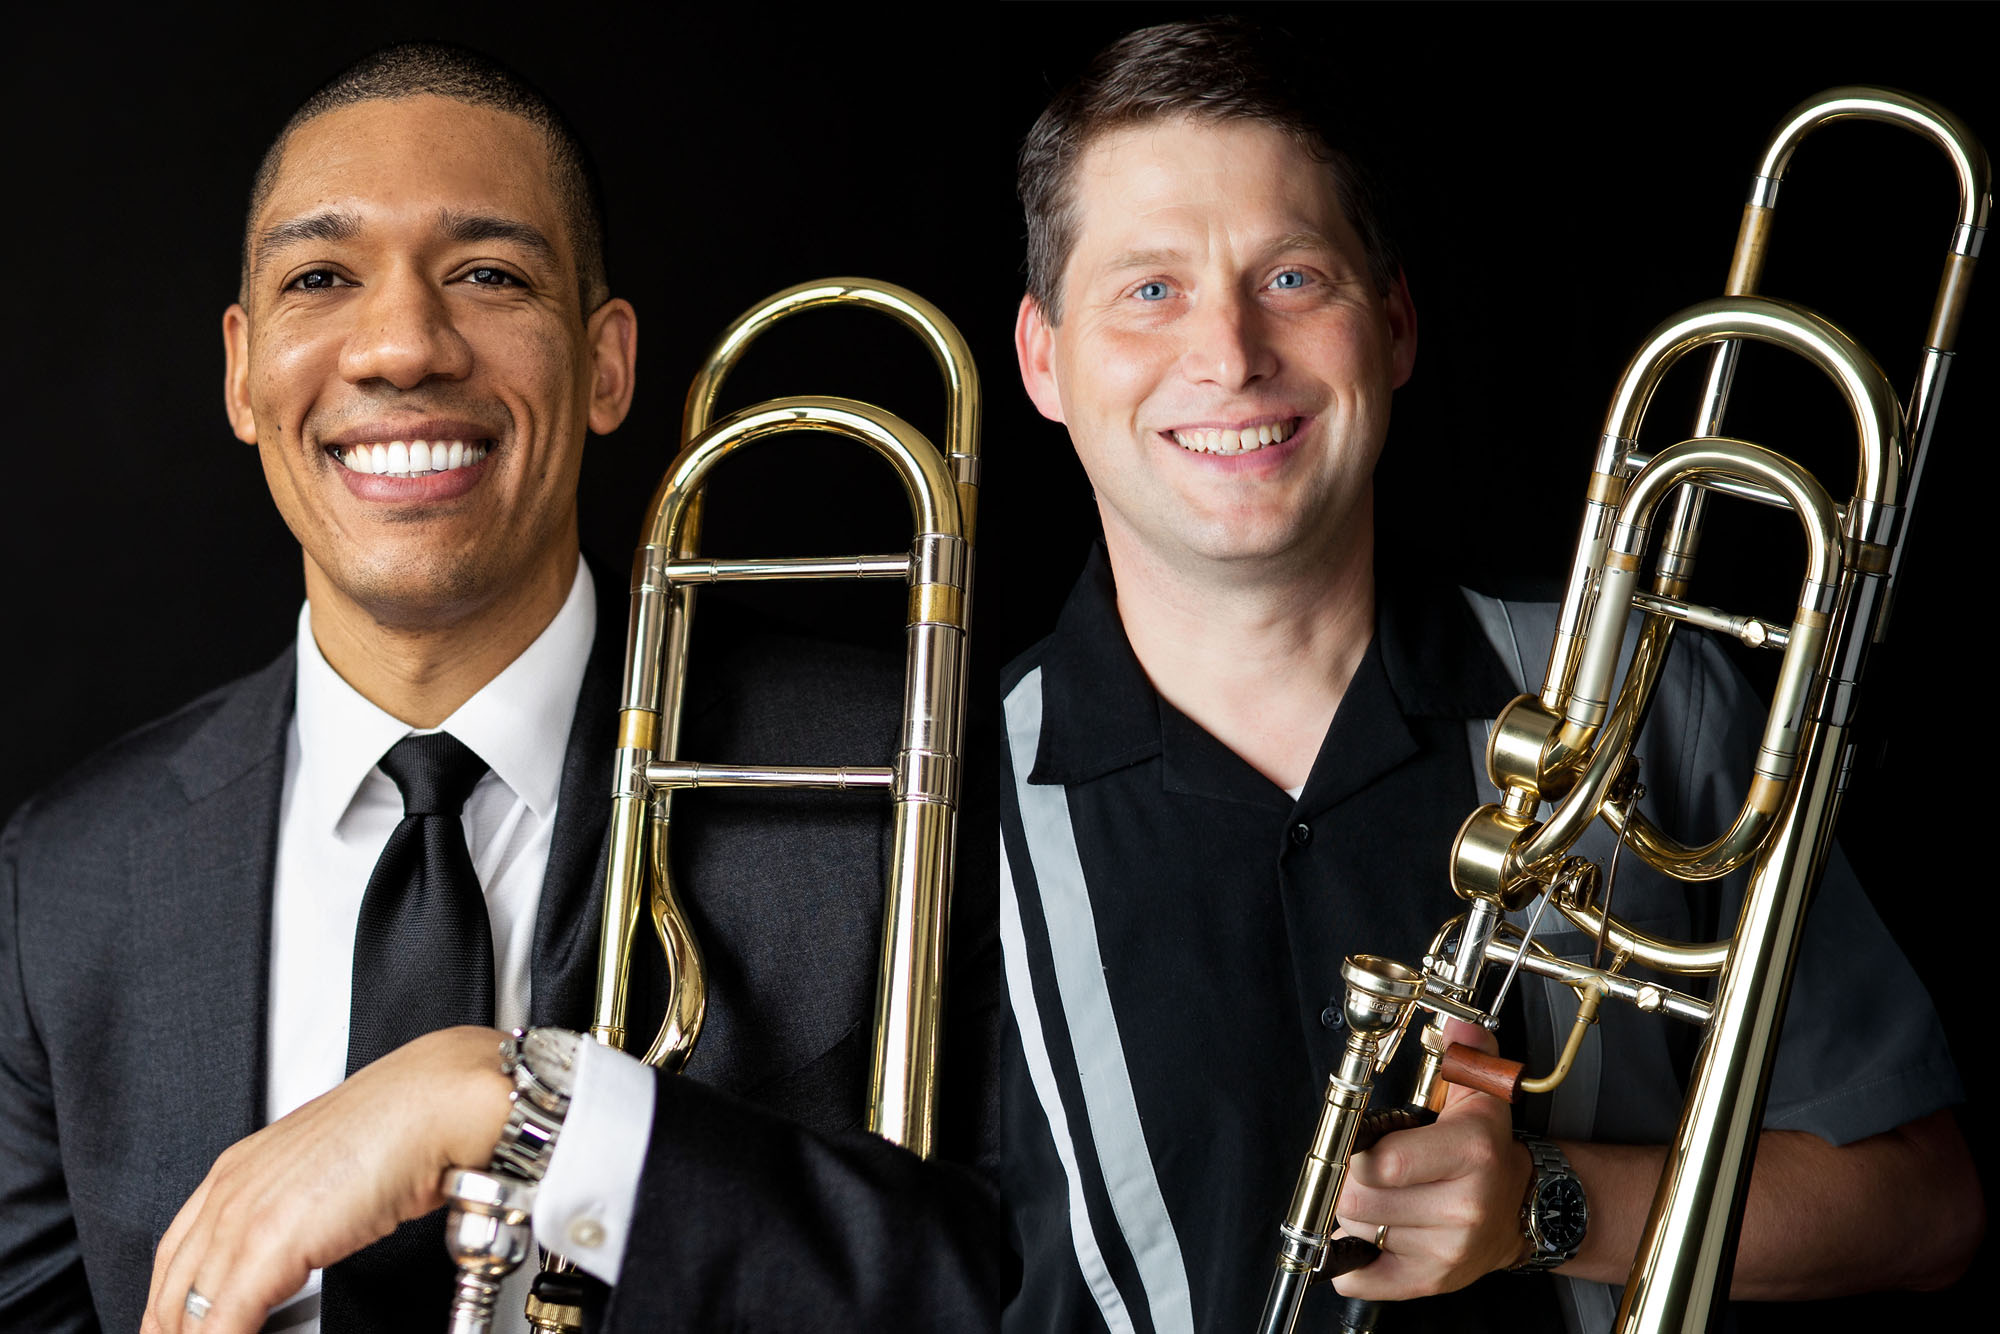 Weston Sprott and Denson Paul Pollard holding their trombones and smiling against a plain black background